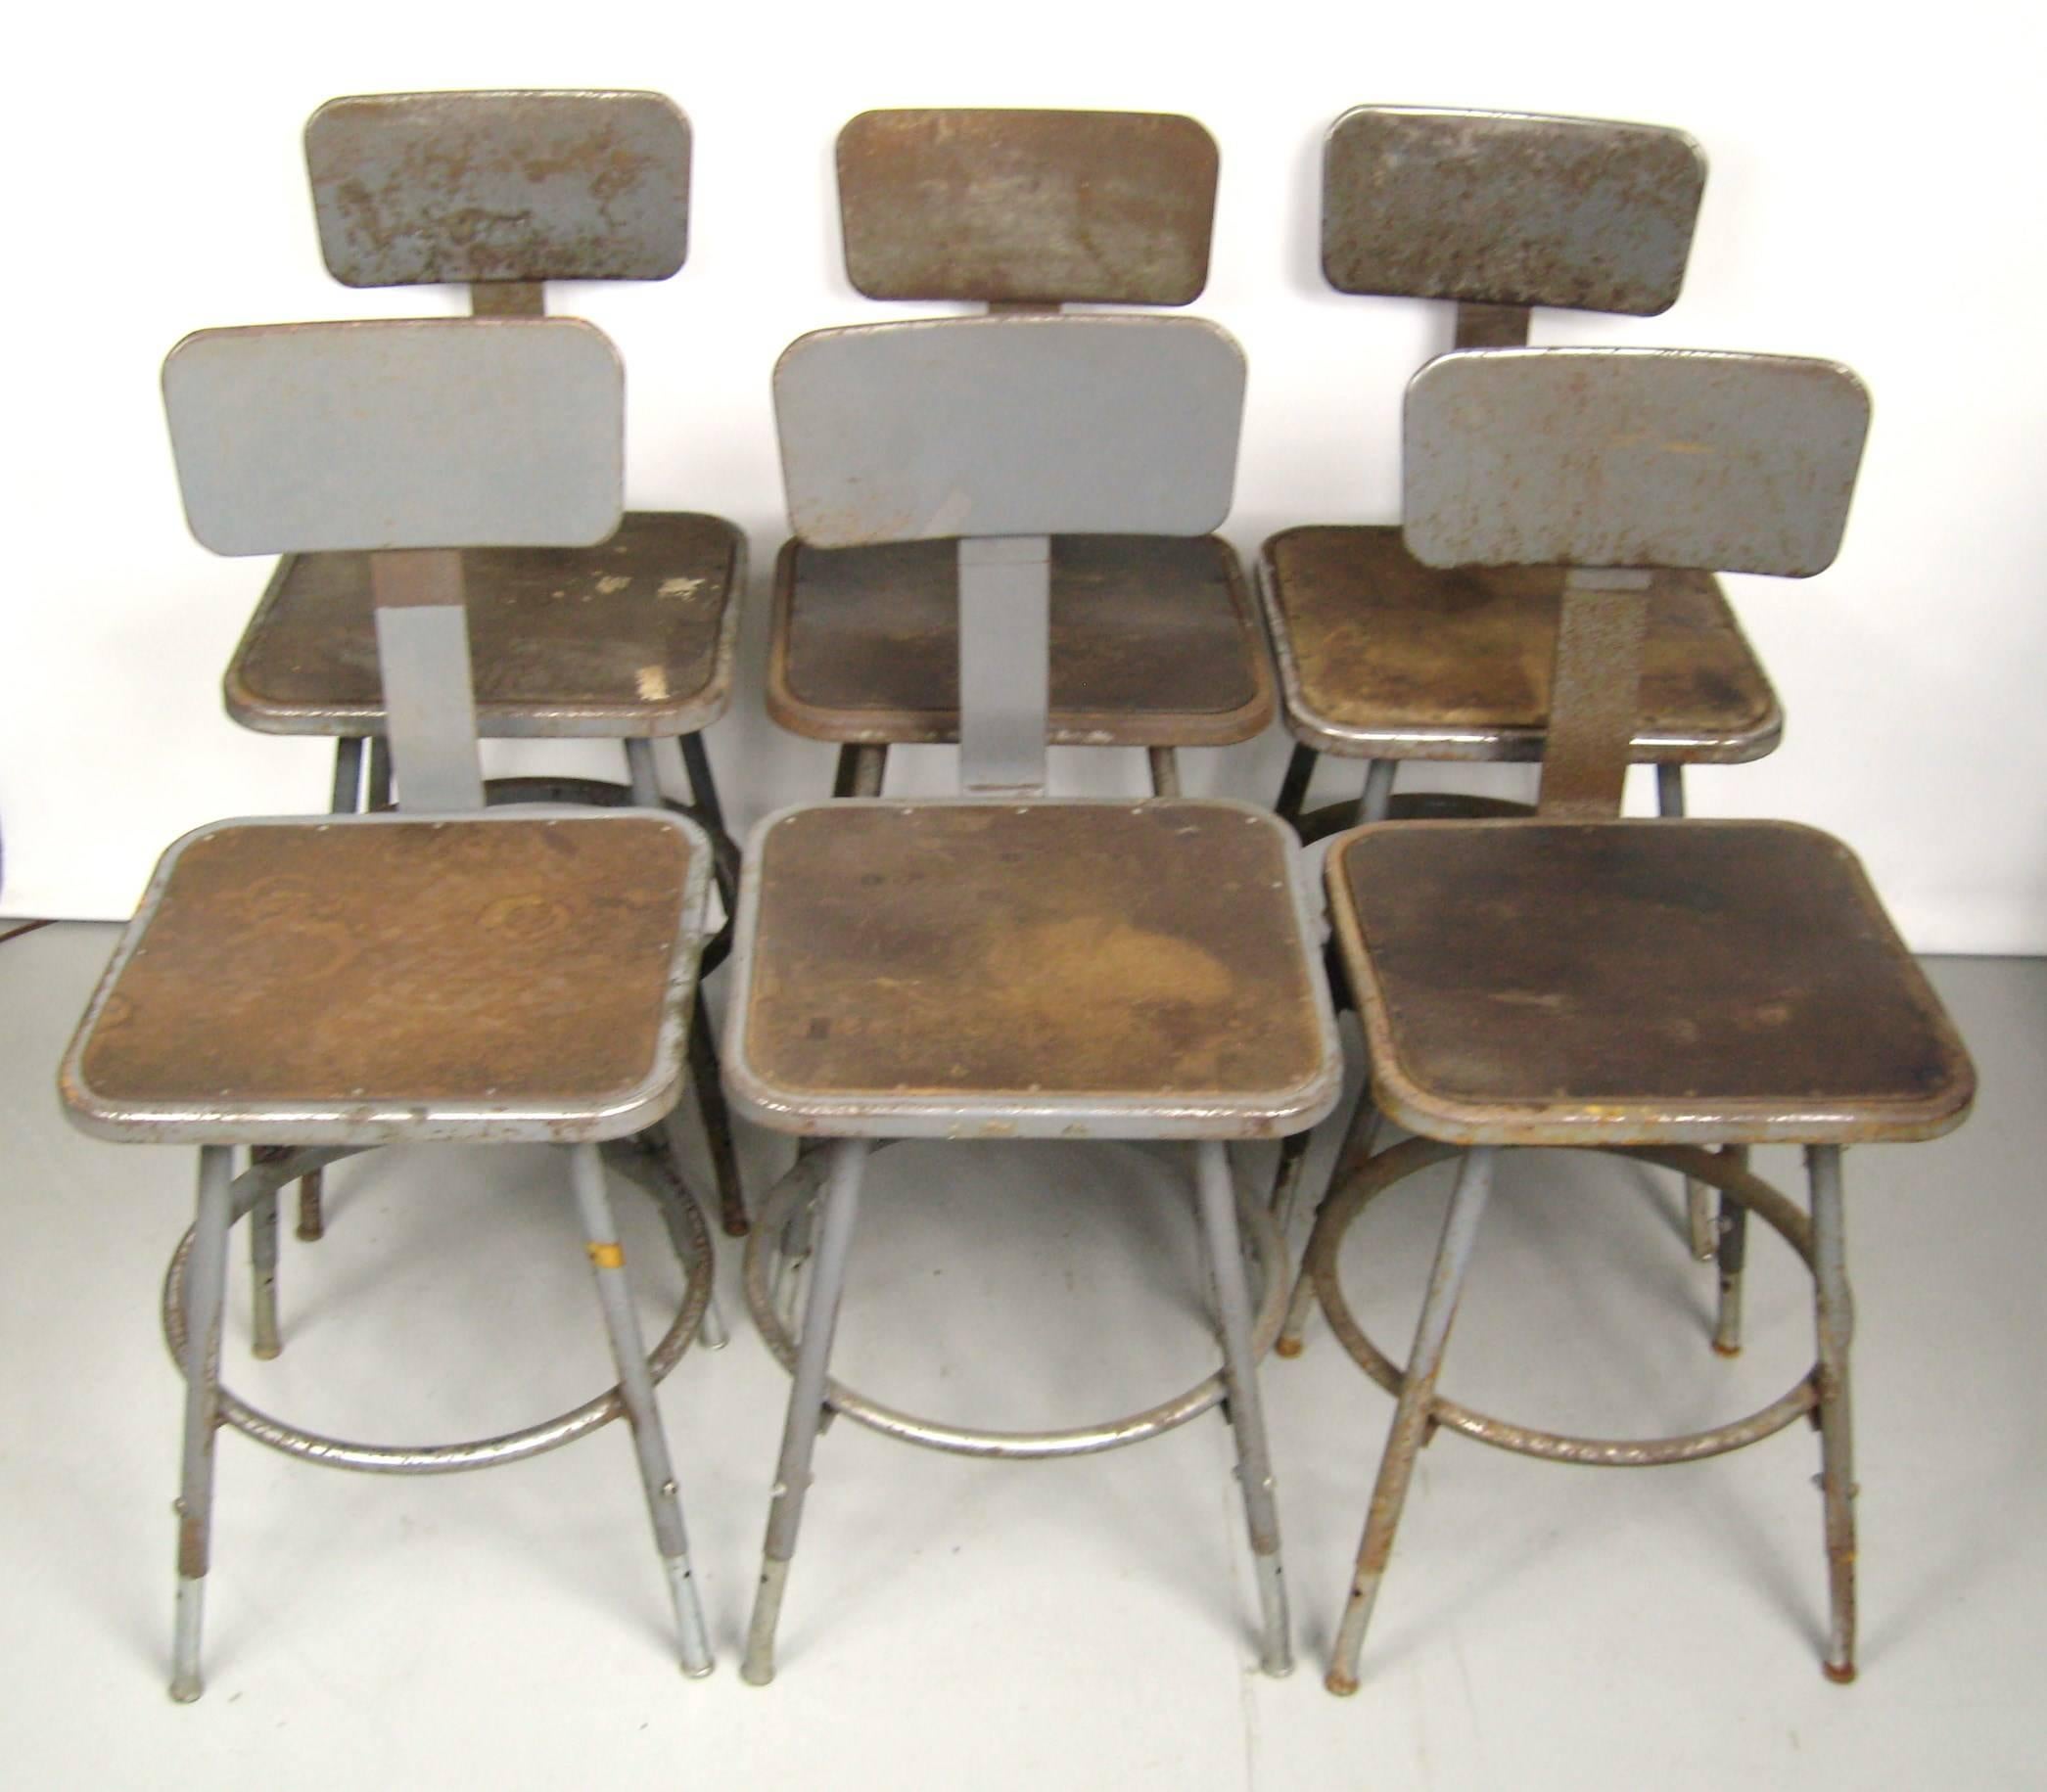 Fantastic set of six industrial metal stools from schrade knife factory in Ellenville NY.